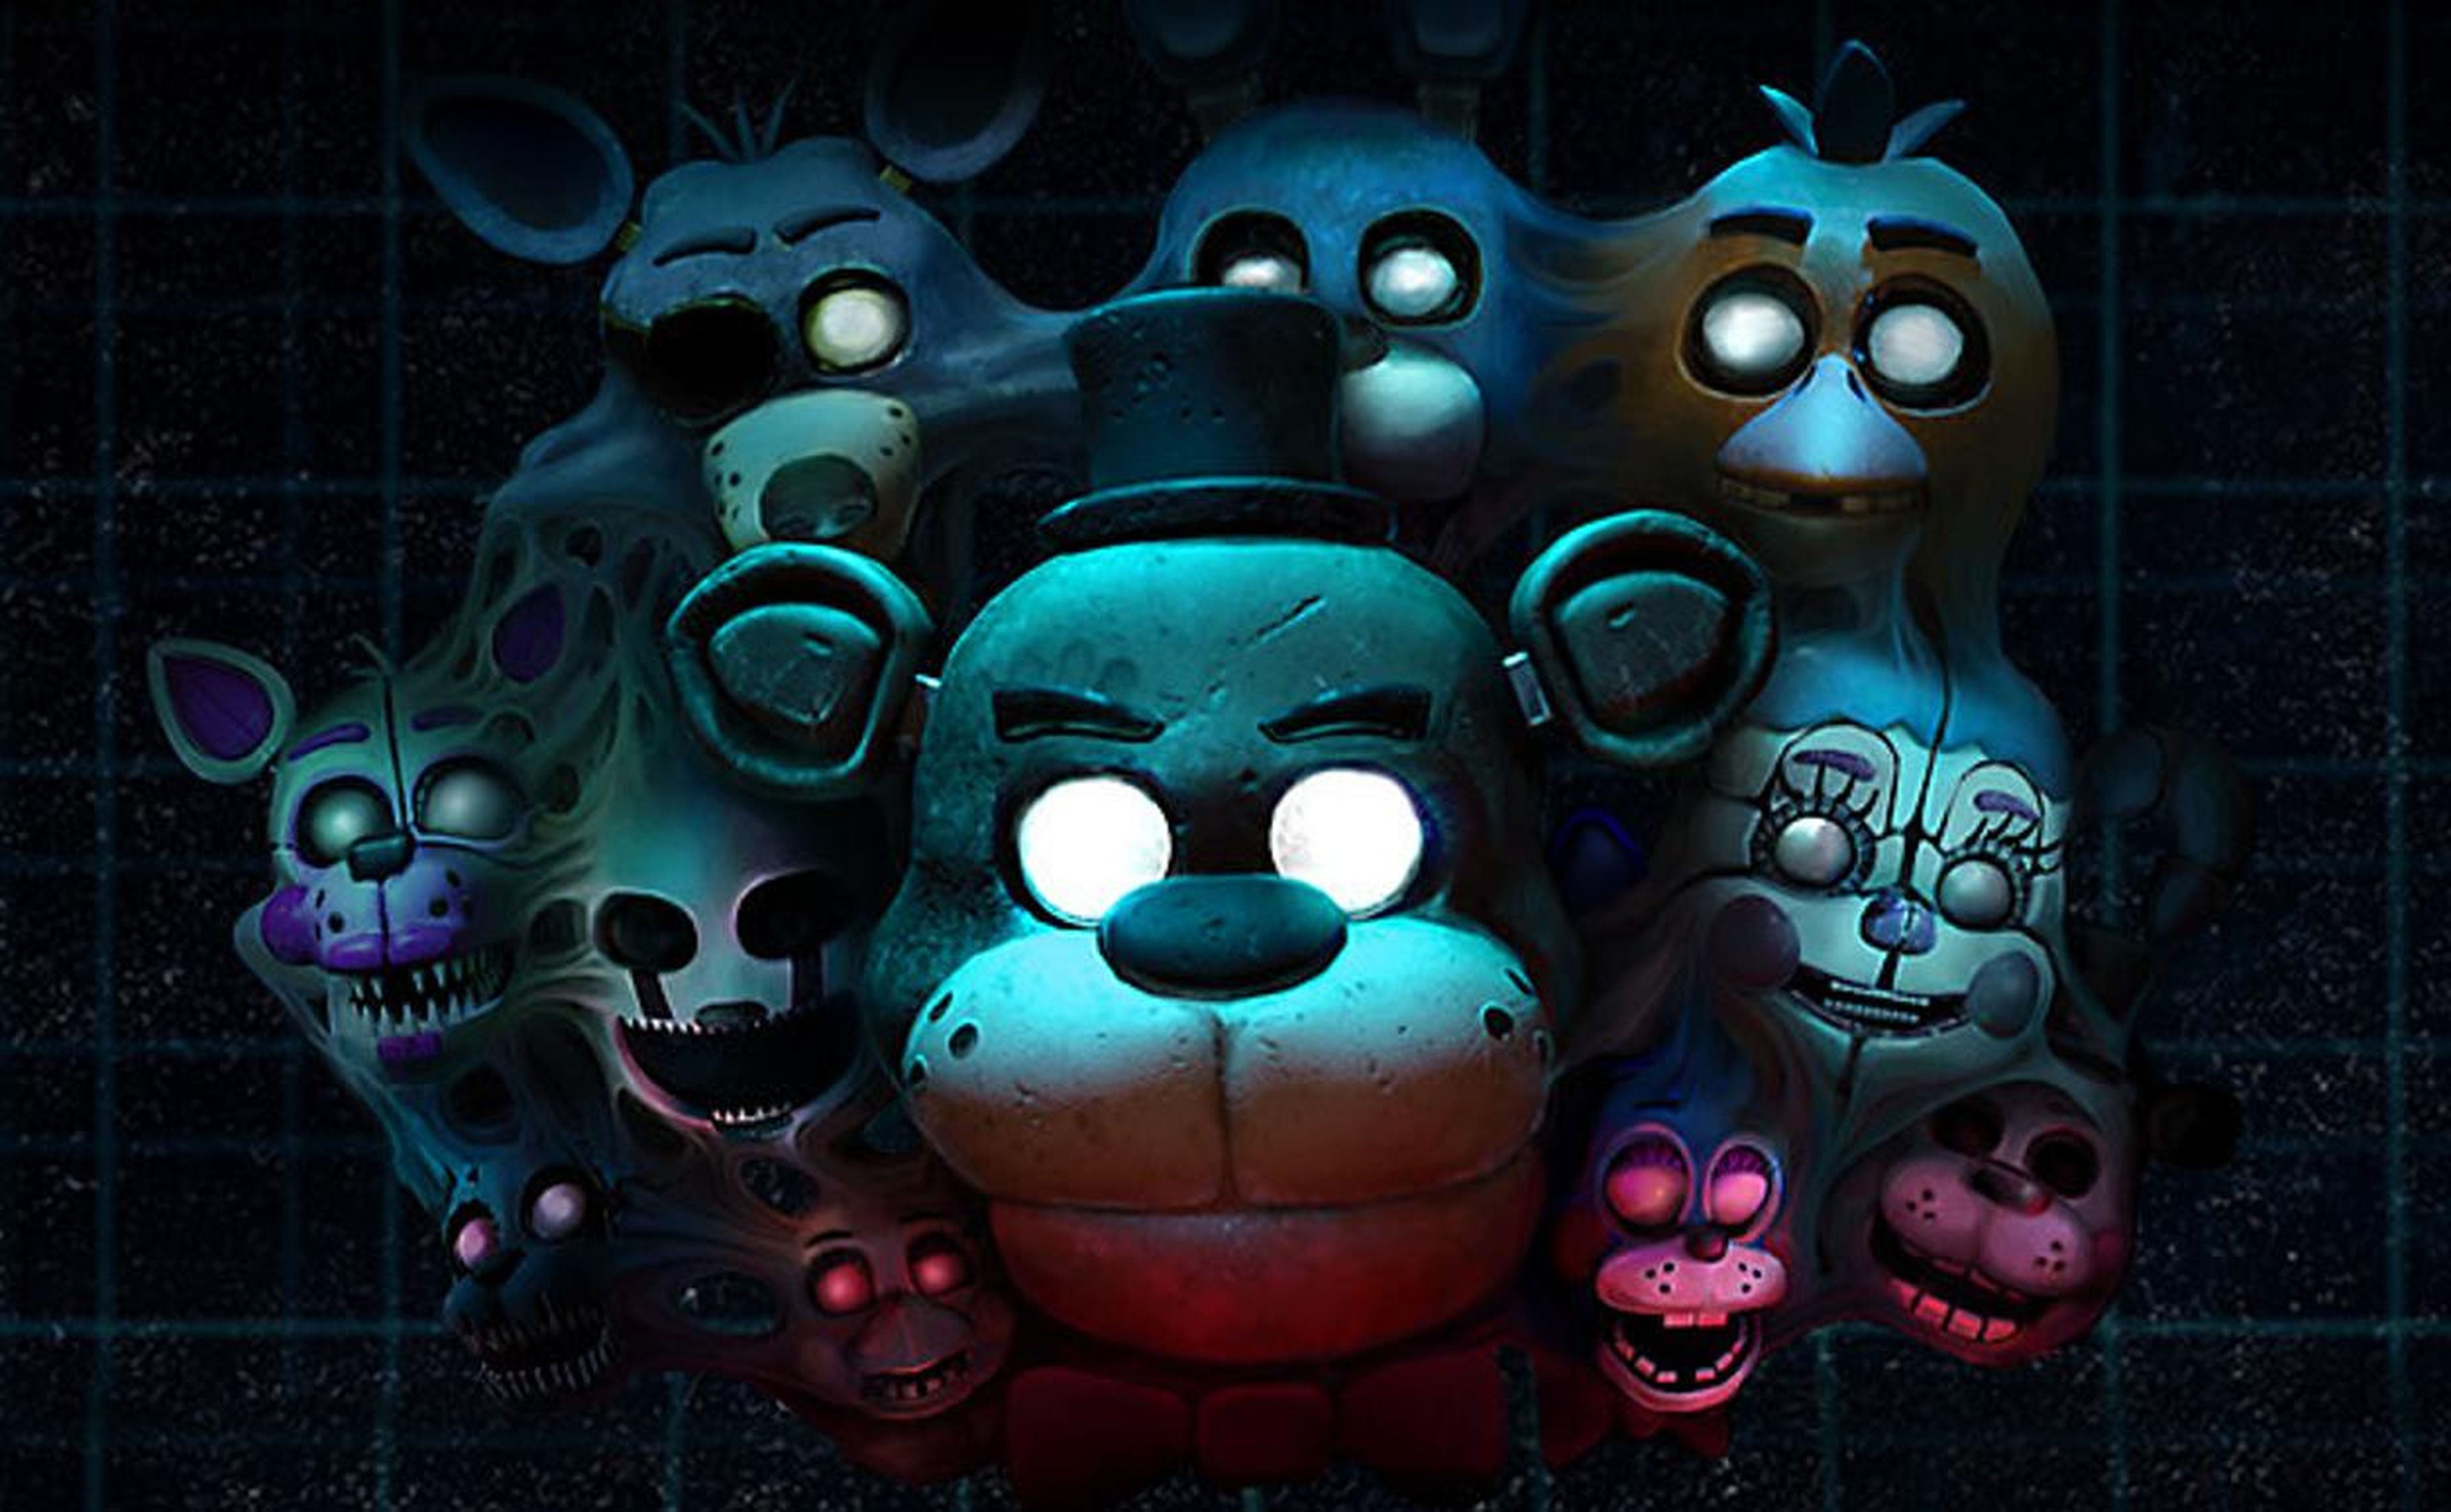 5 с фредди 8. 5 Nights at Freddy's. ФНАФ 5 VR Фредди. Five Nights at Freddy's 5. ФНАФ 8 VR help wanted.